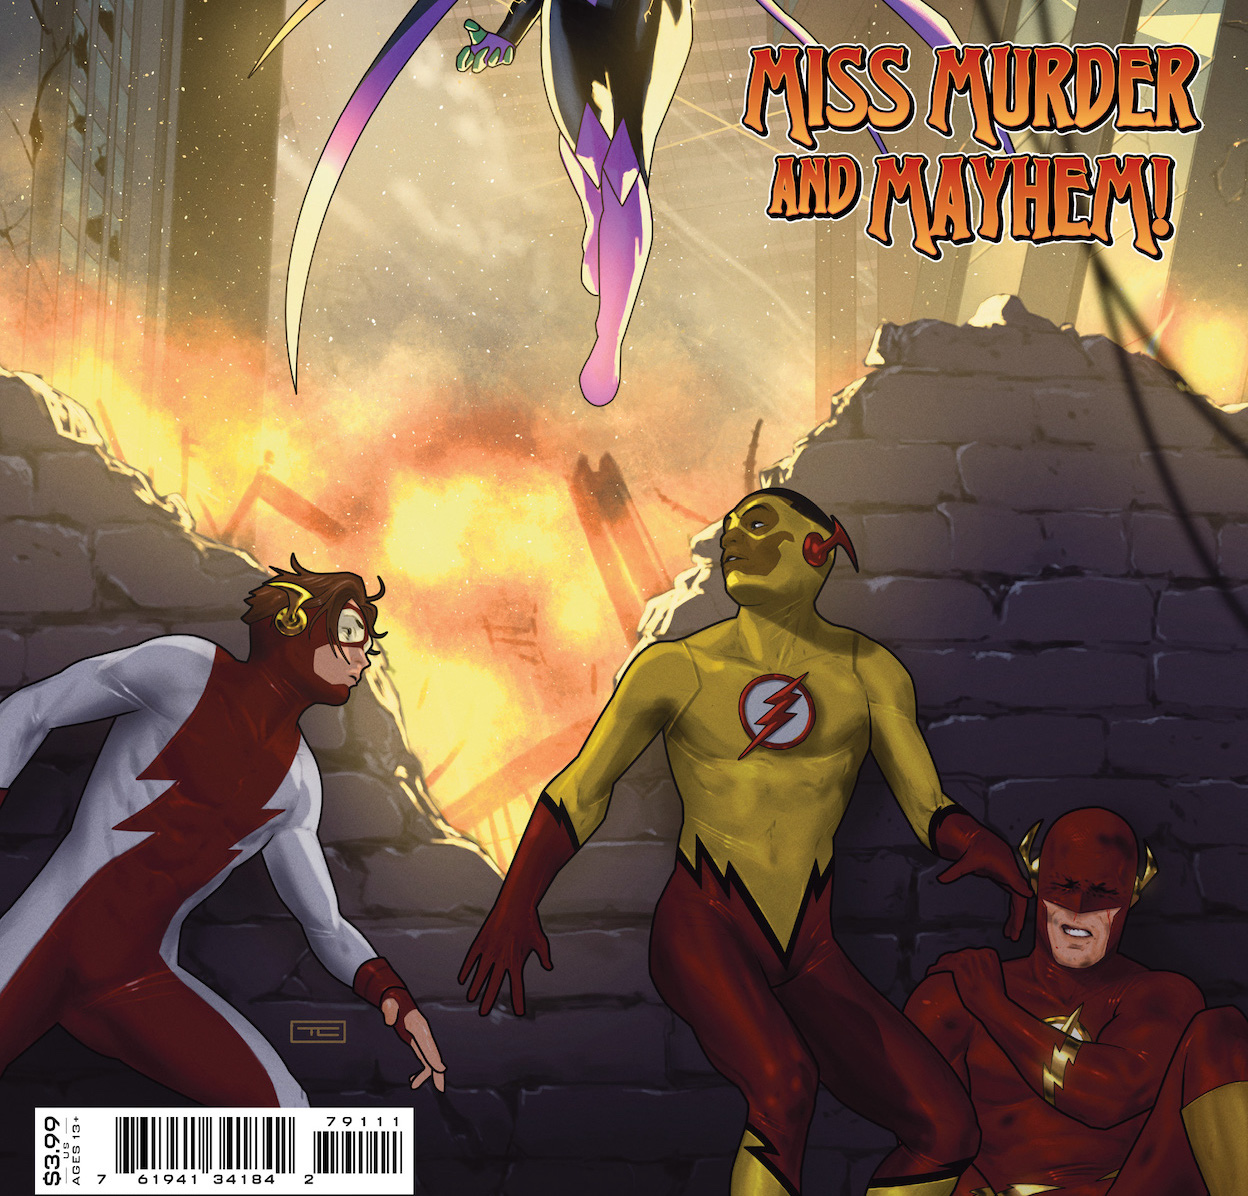 'The Flash' #791 kicks things up a notch and introduces Miss Murder